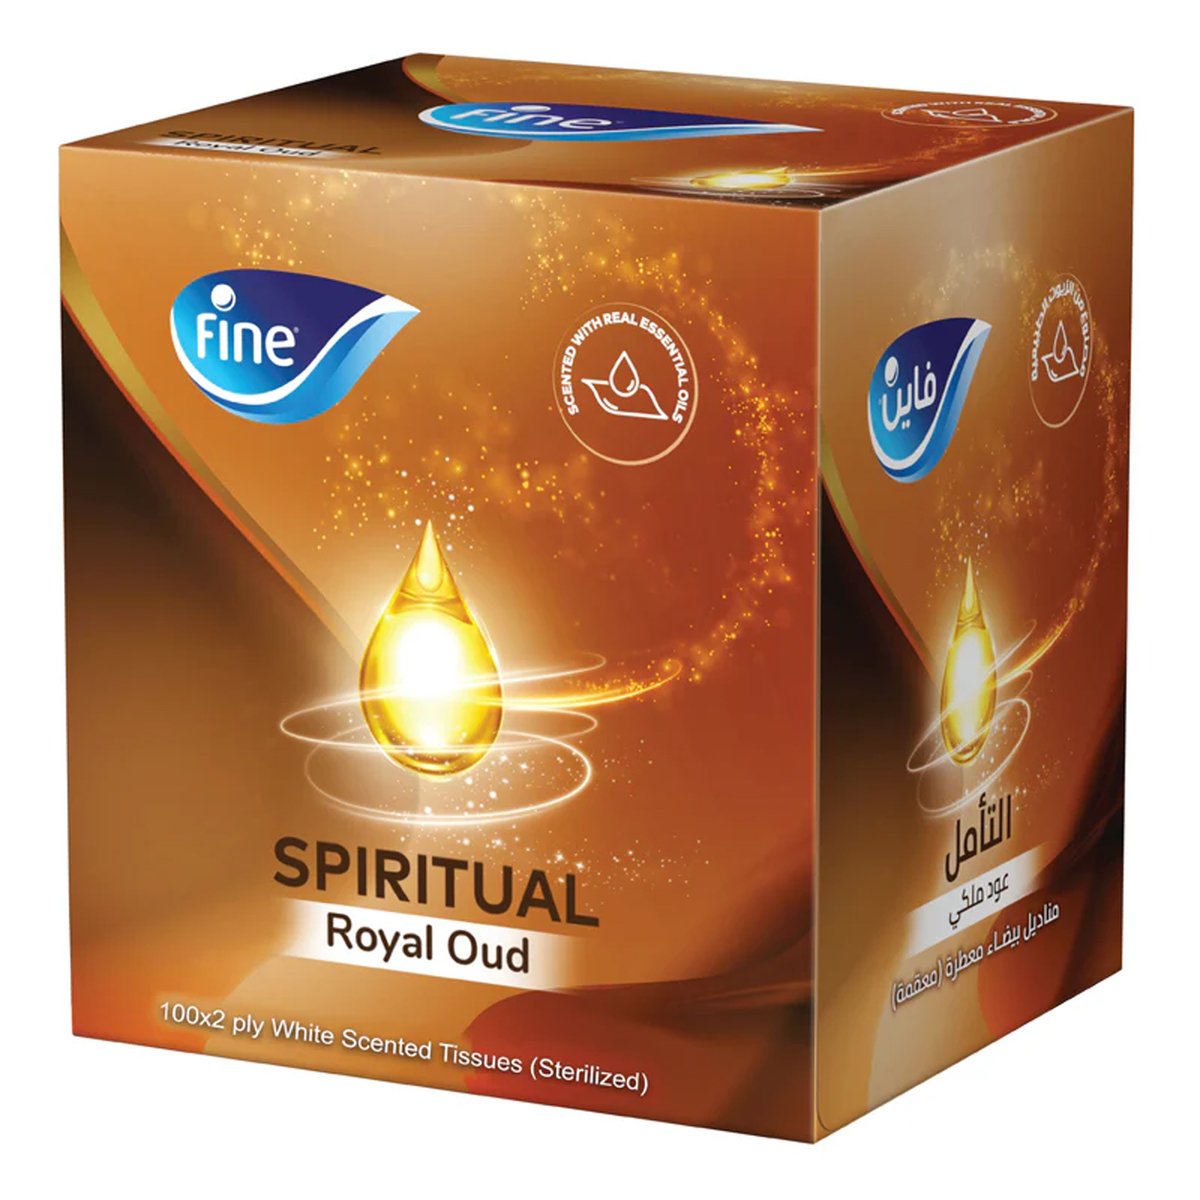 Buy Fine Spiritual Royal Oud Facial Tissue 2ply 100 pcs Online at Best Price | Facial Tissues | Lulu Kuwait in Kuwait